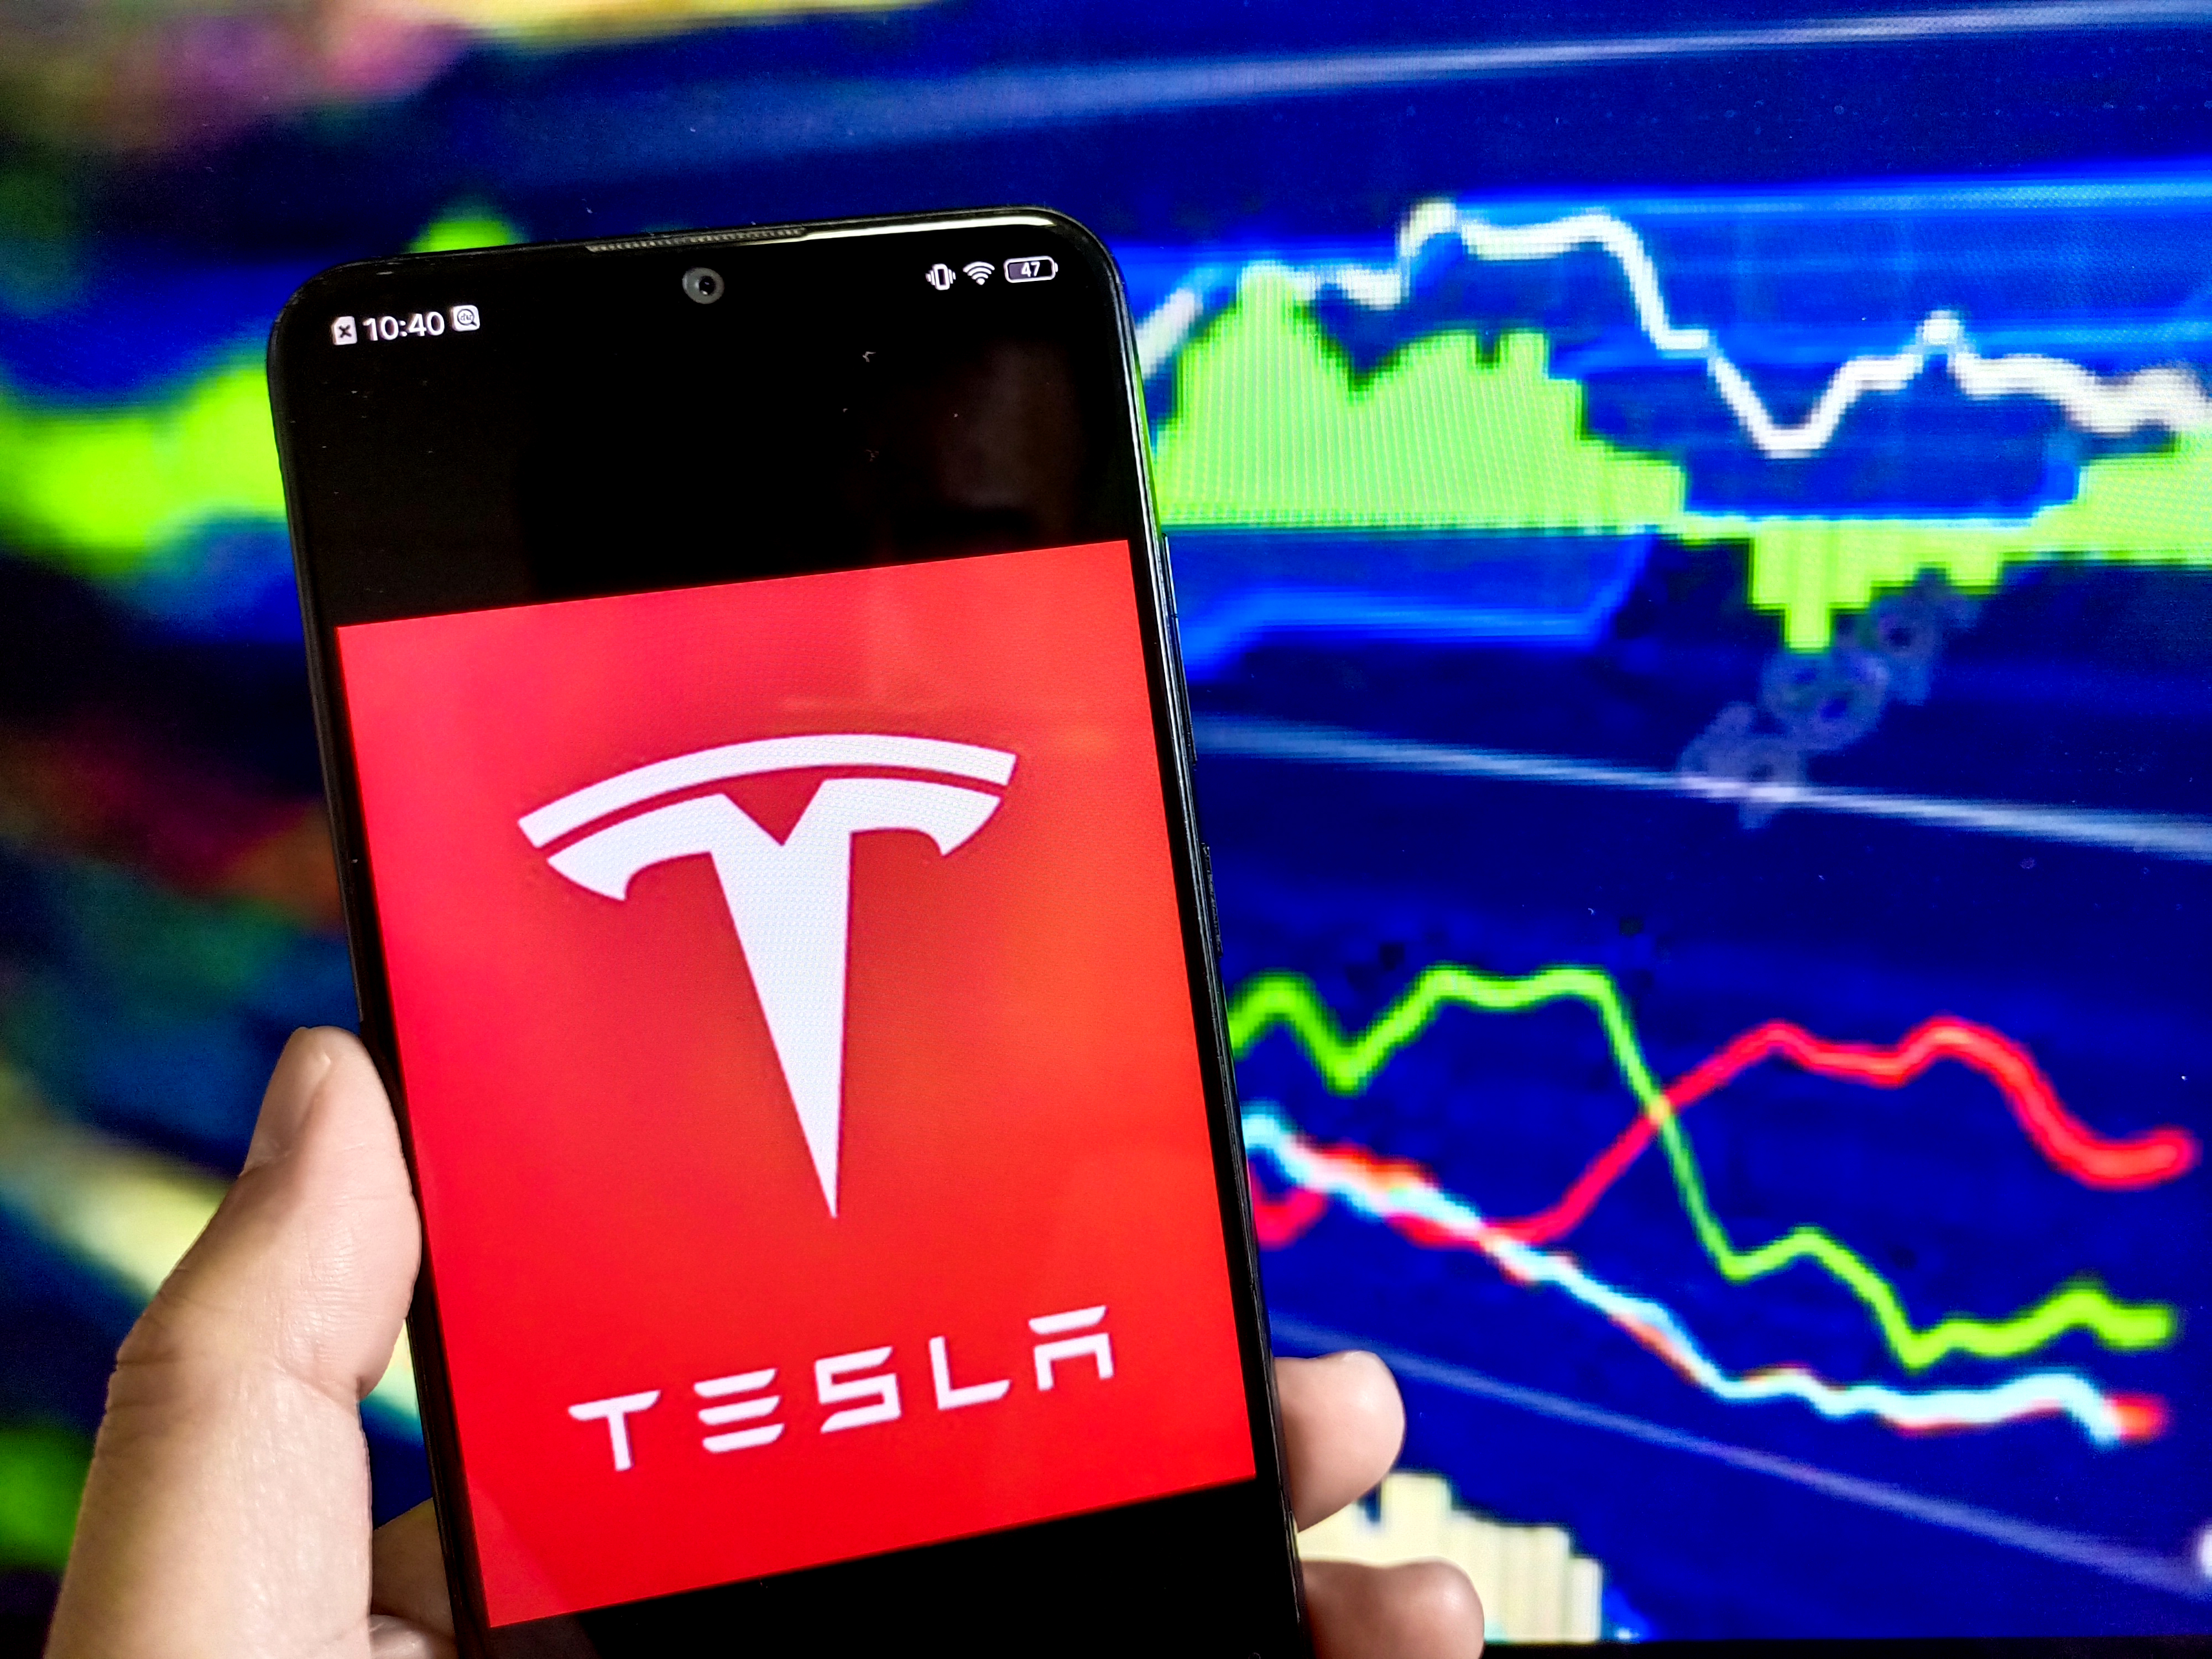 The Tesla logo on a phone in front of charts